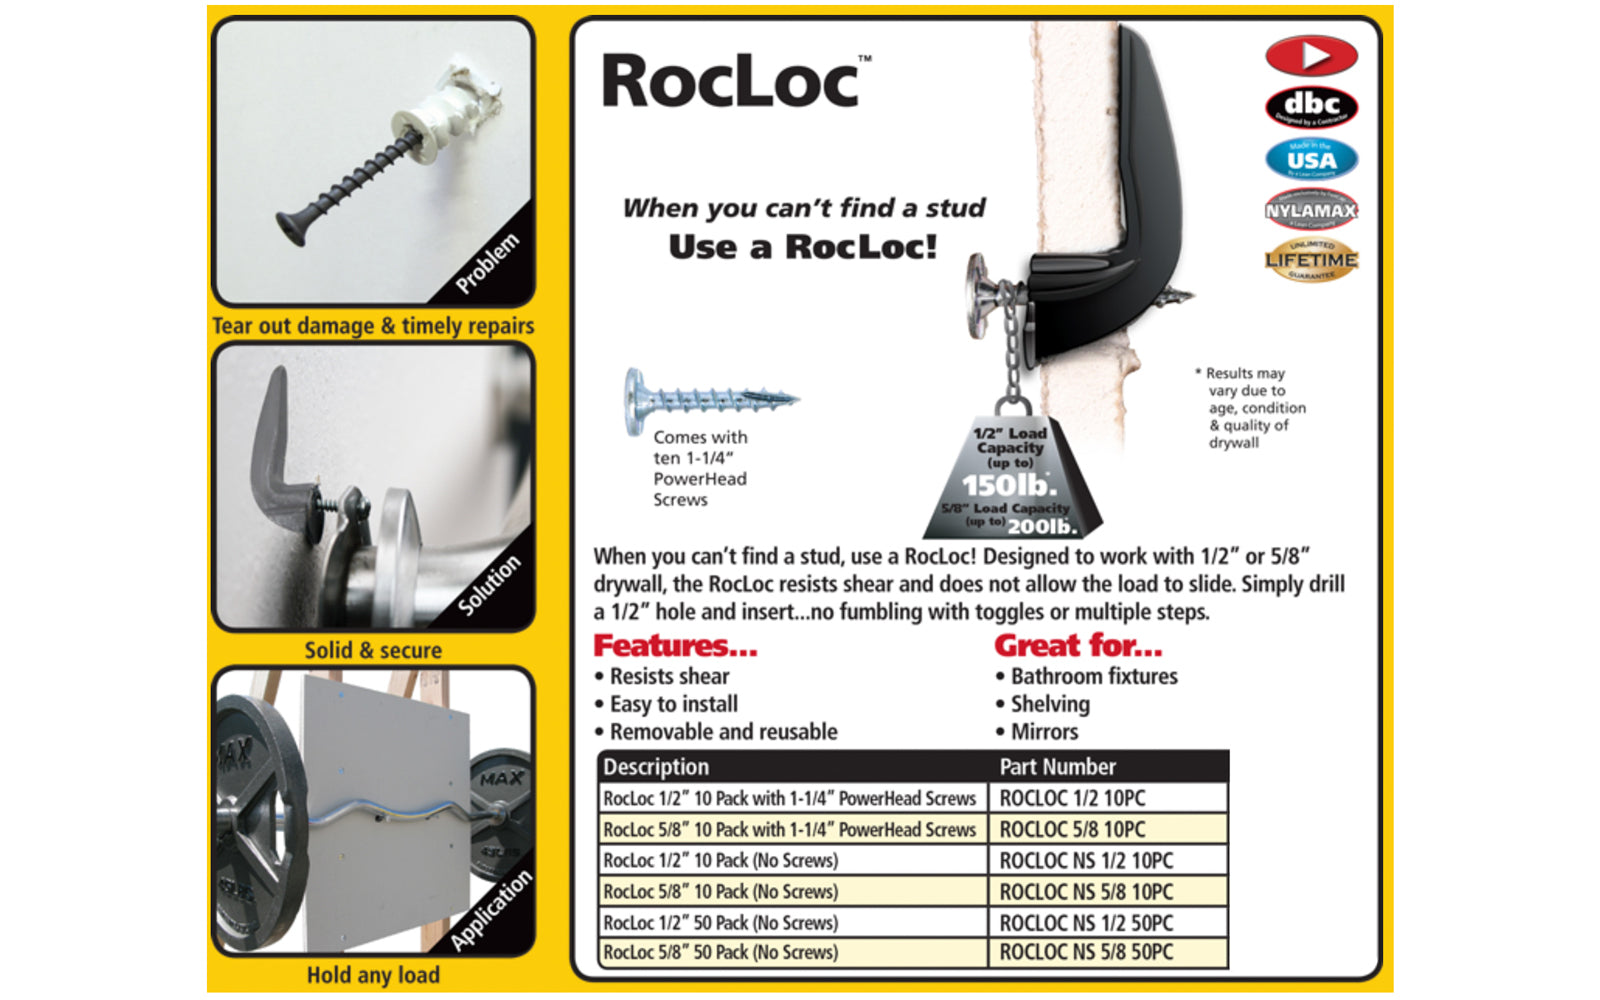 BC Fasteners and Tools is a Stiletto Tools Distributor